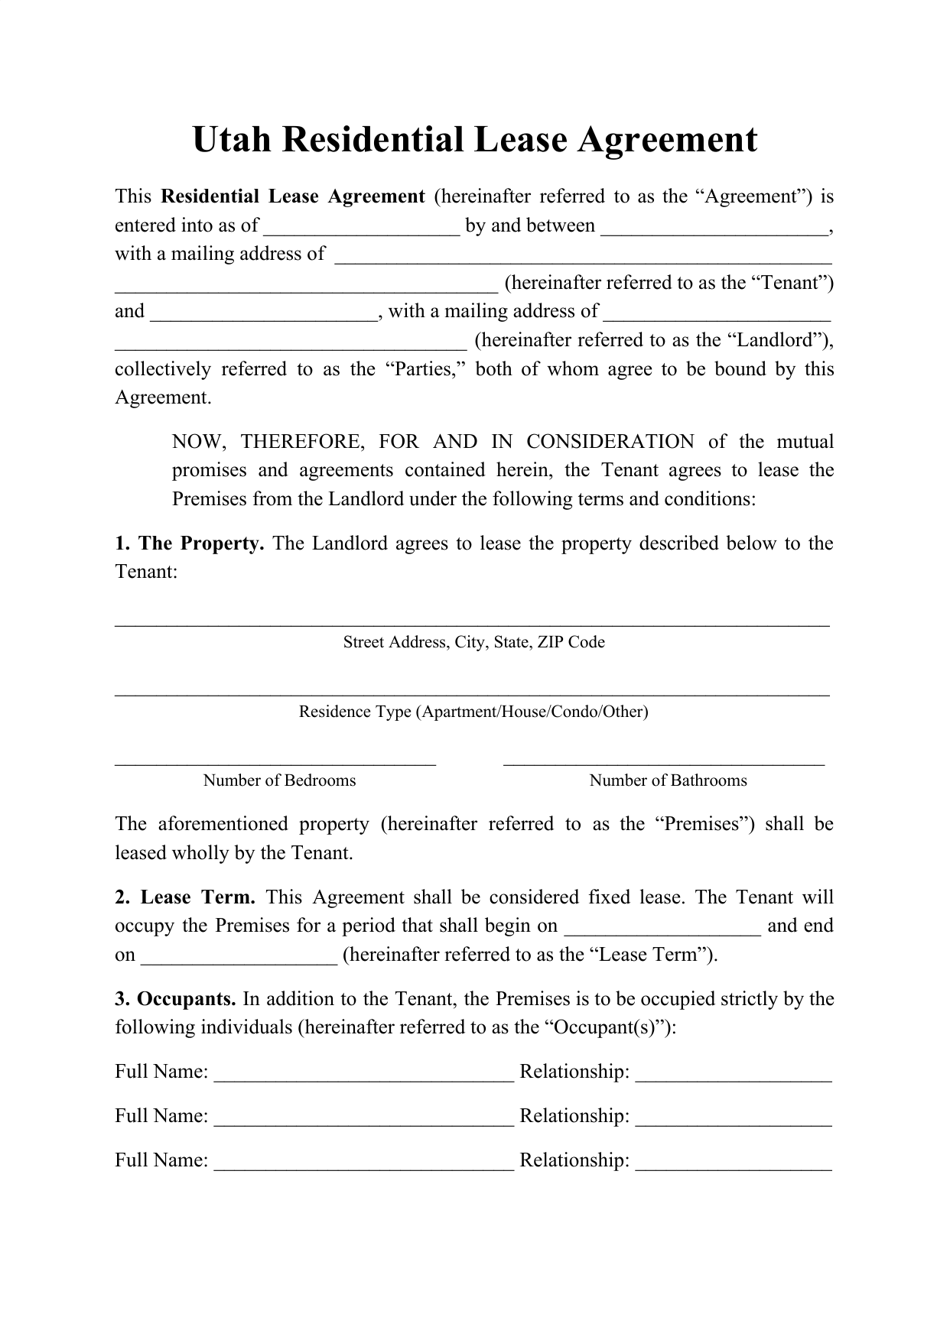 Residential Lease Agreement Template - Utah, Page 1